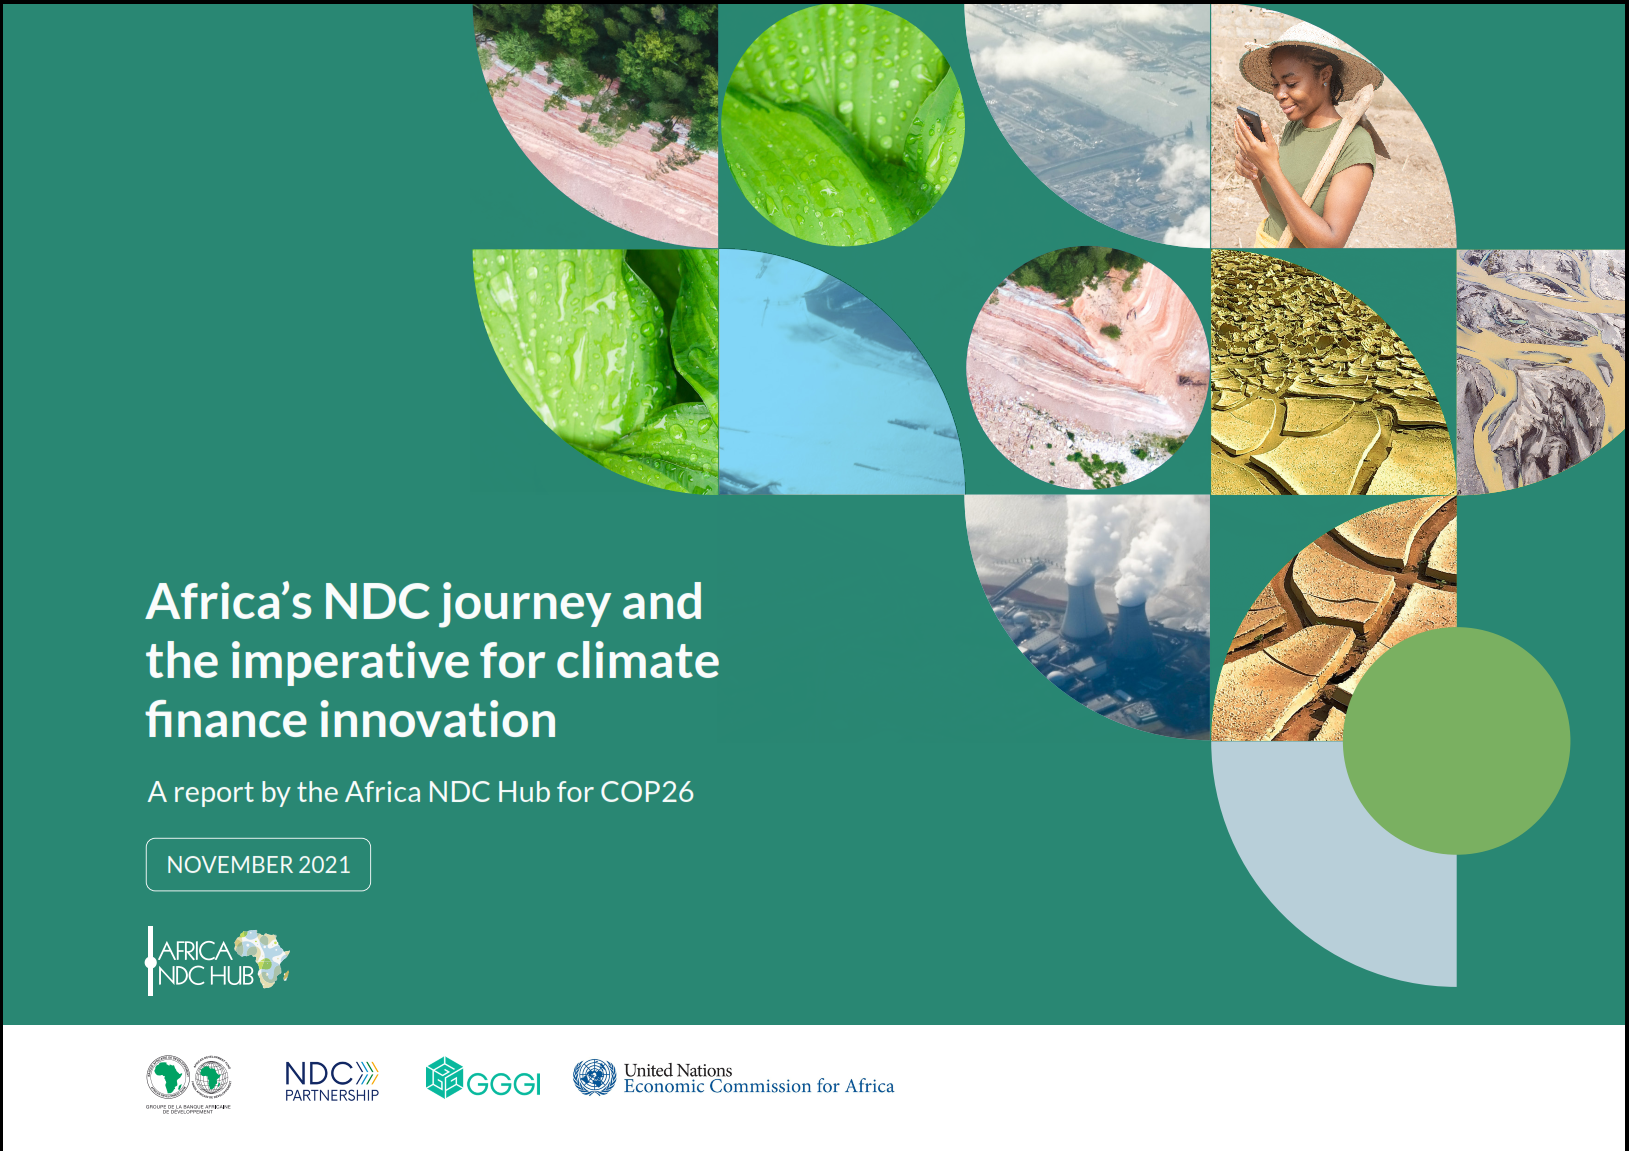 Africa’s NDC journey and the imperative for climate finance innovation 